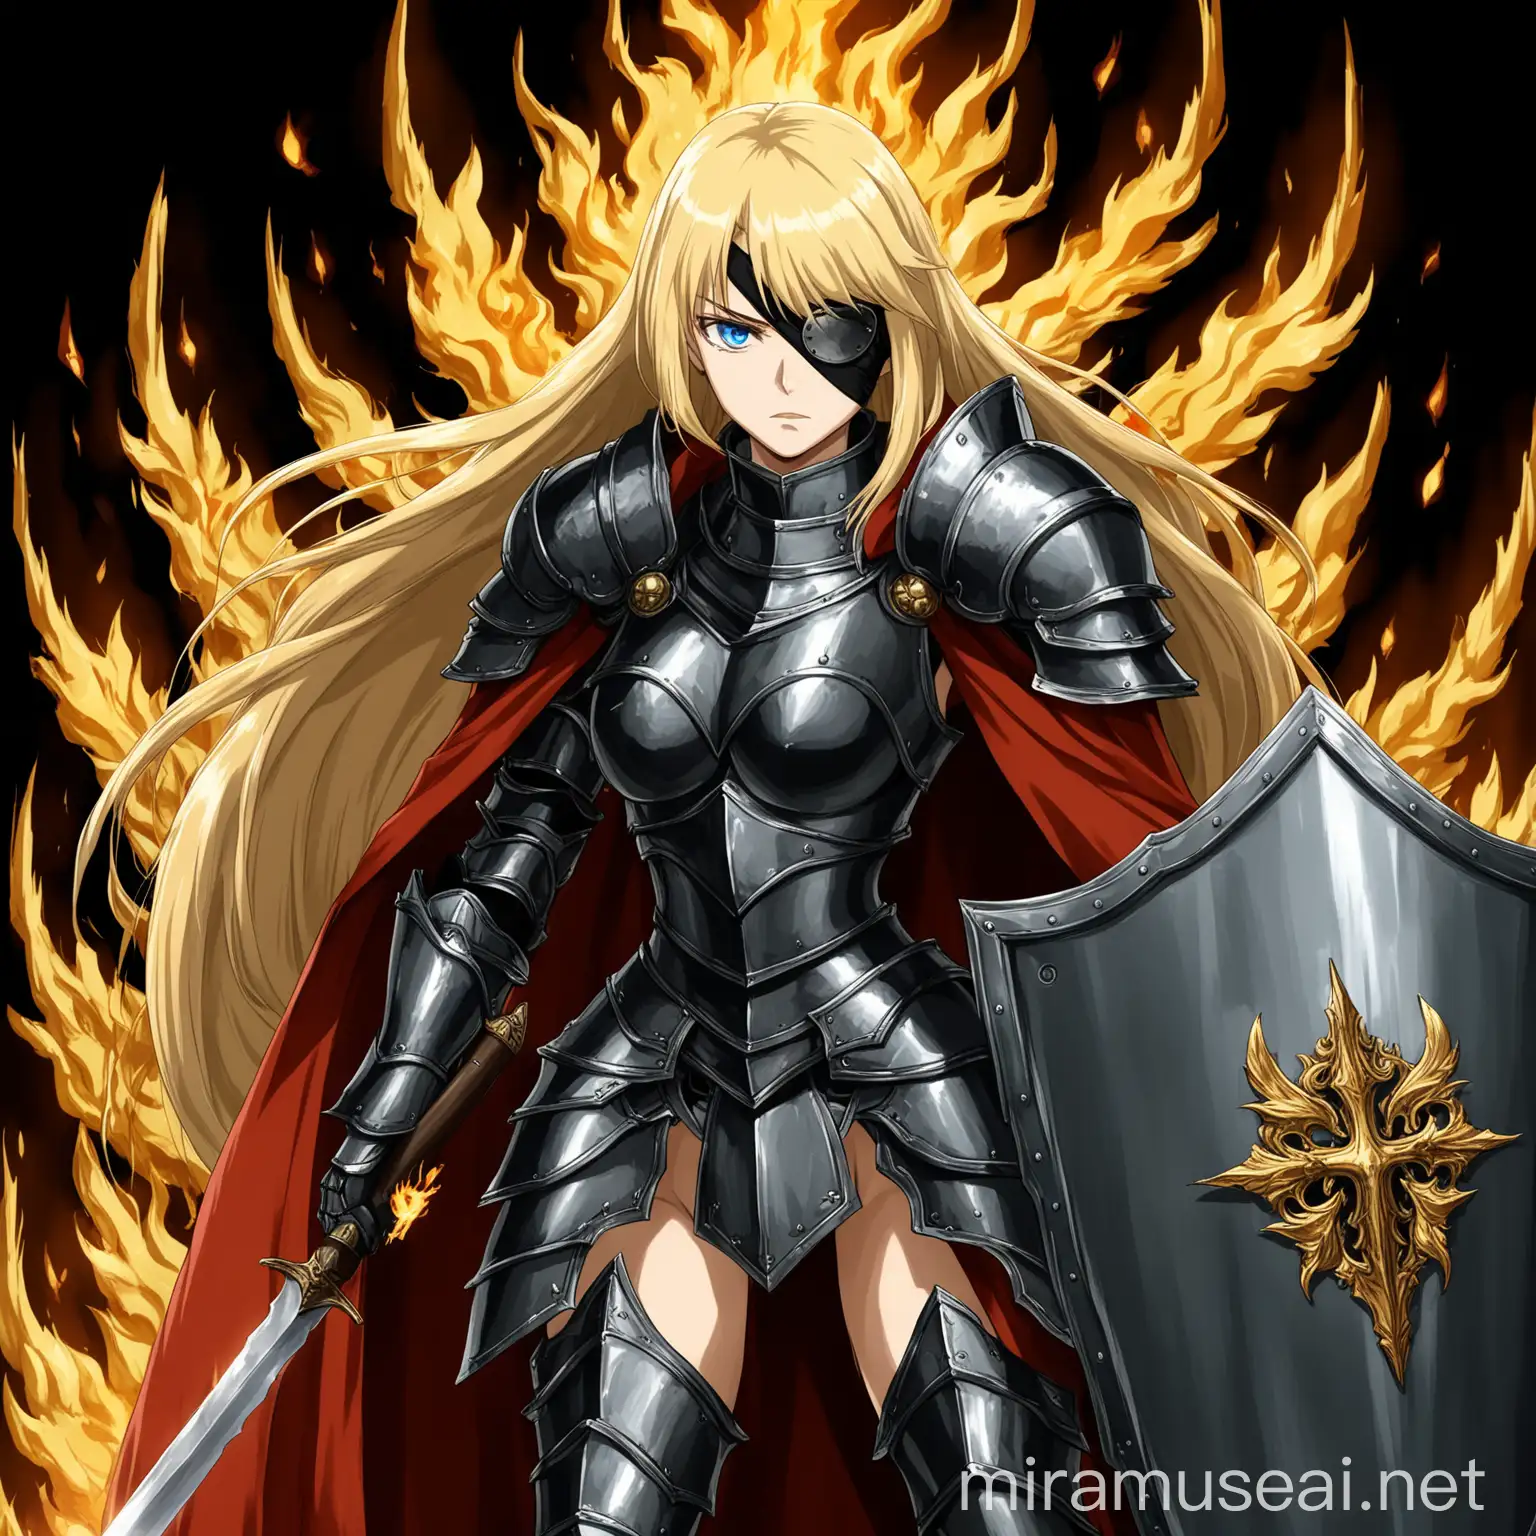 Blonde Woman Paladin in Dark Metal Armor with Rifle and Shield